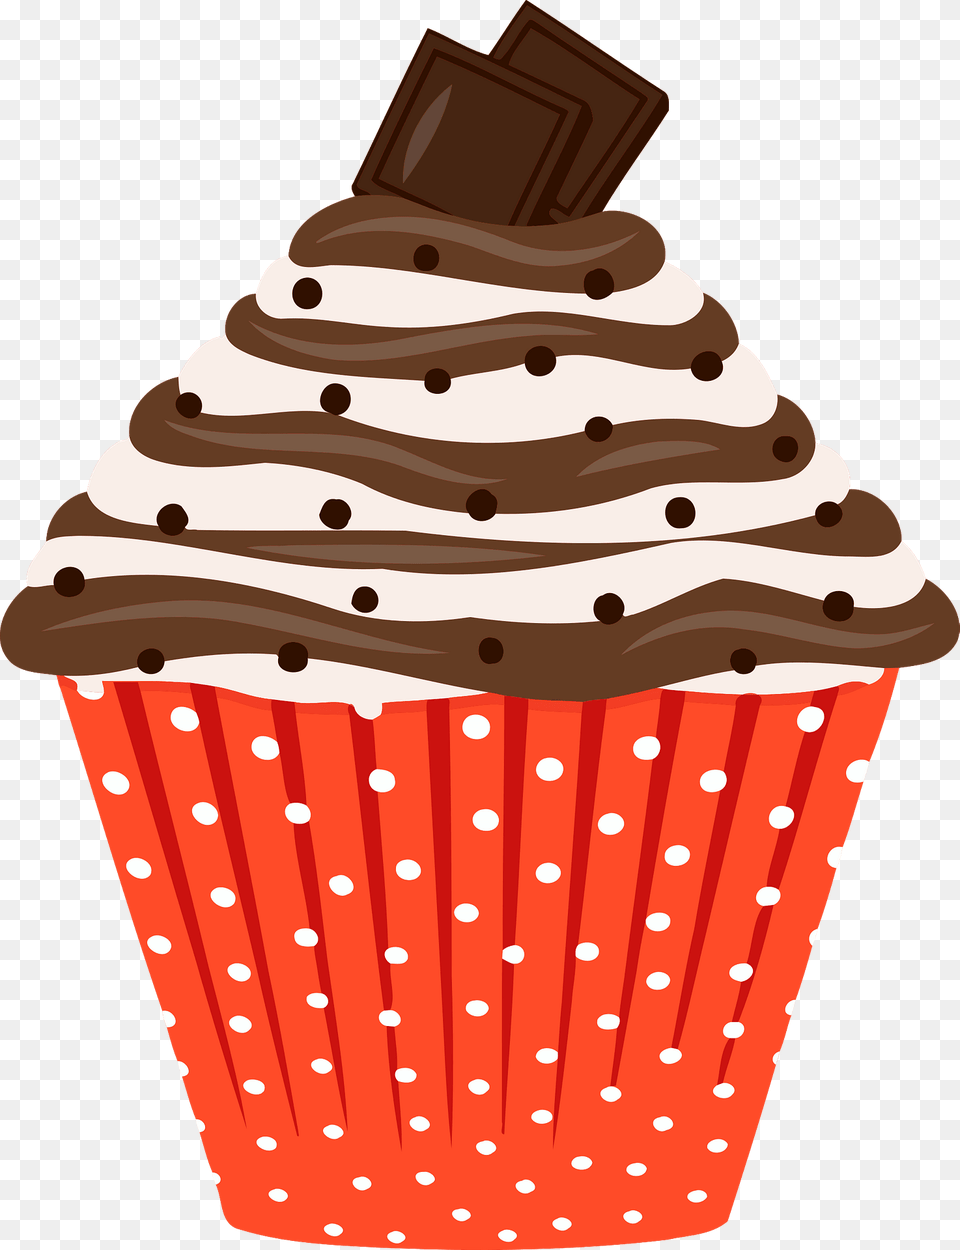 Cupcake With Swirled Chocolate Frosting Clipart, Cake, Cream, Dessert, Food Png Image